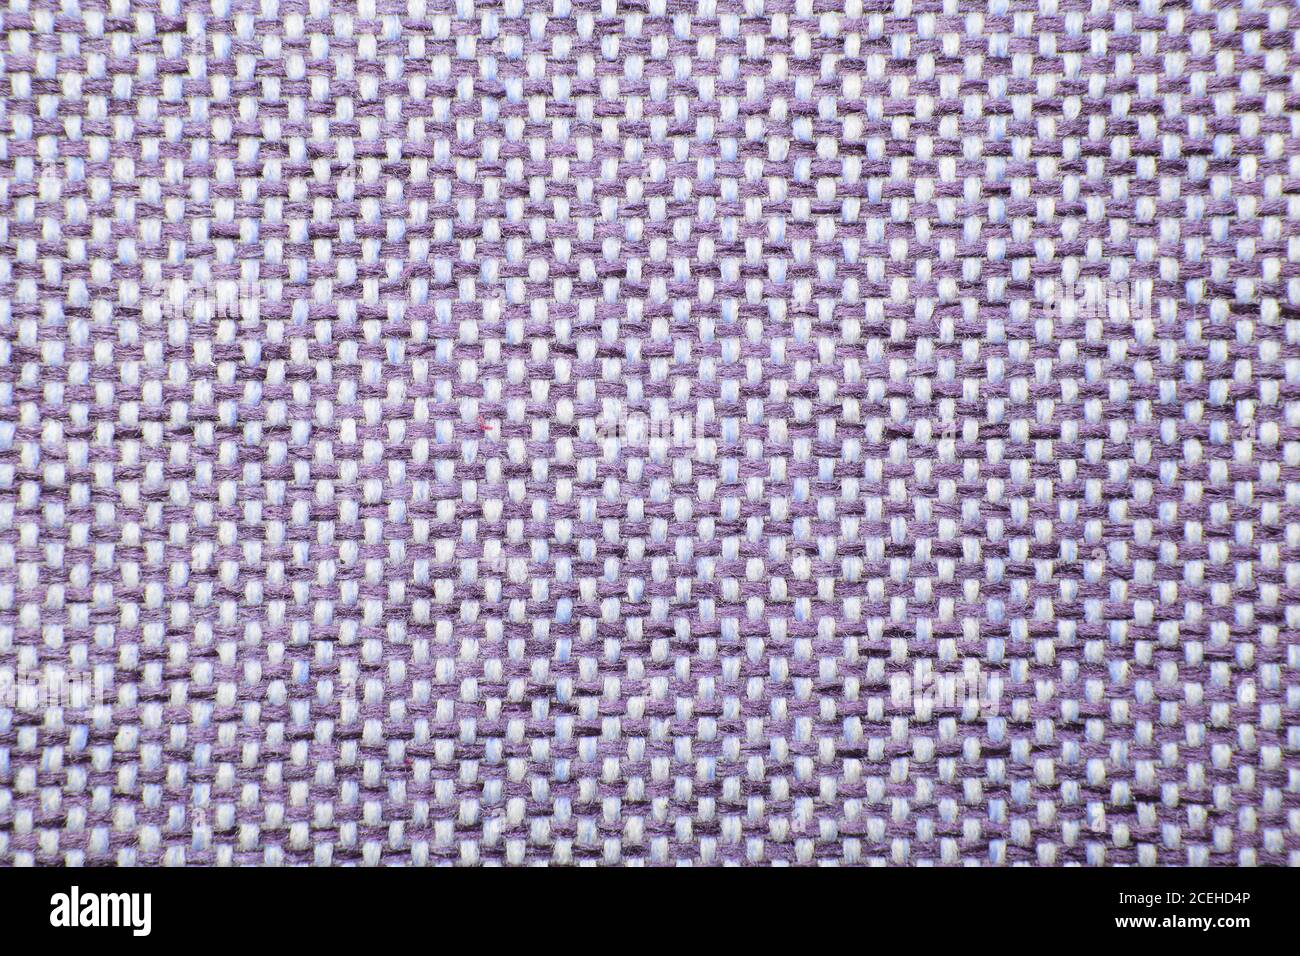 Purple checkered Rough Fabric Texture, Pattern, Background Stock Photo